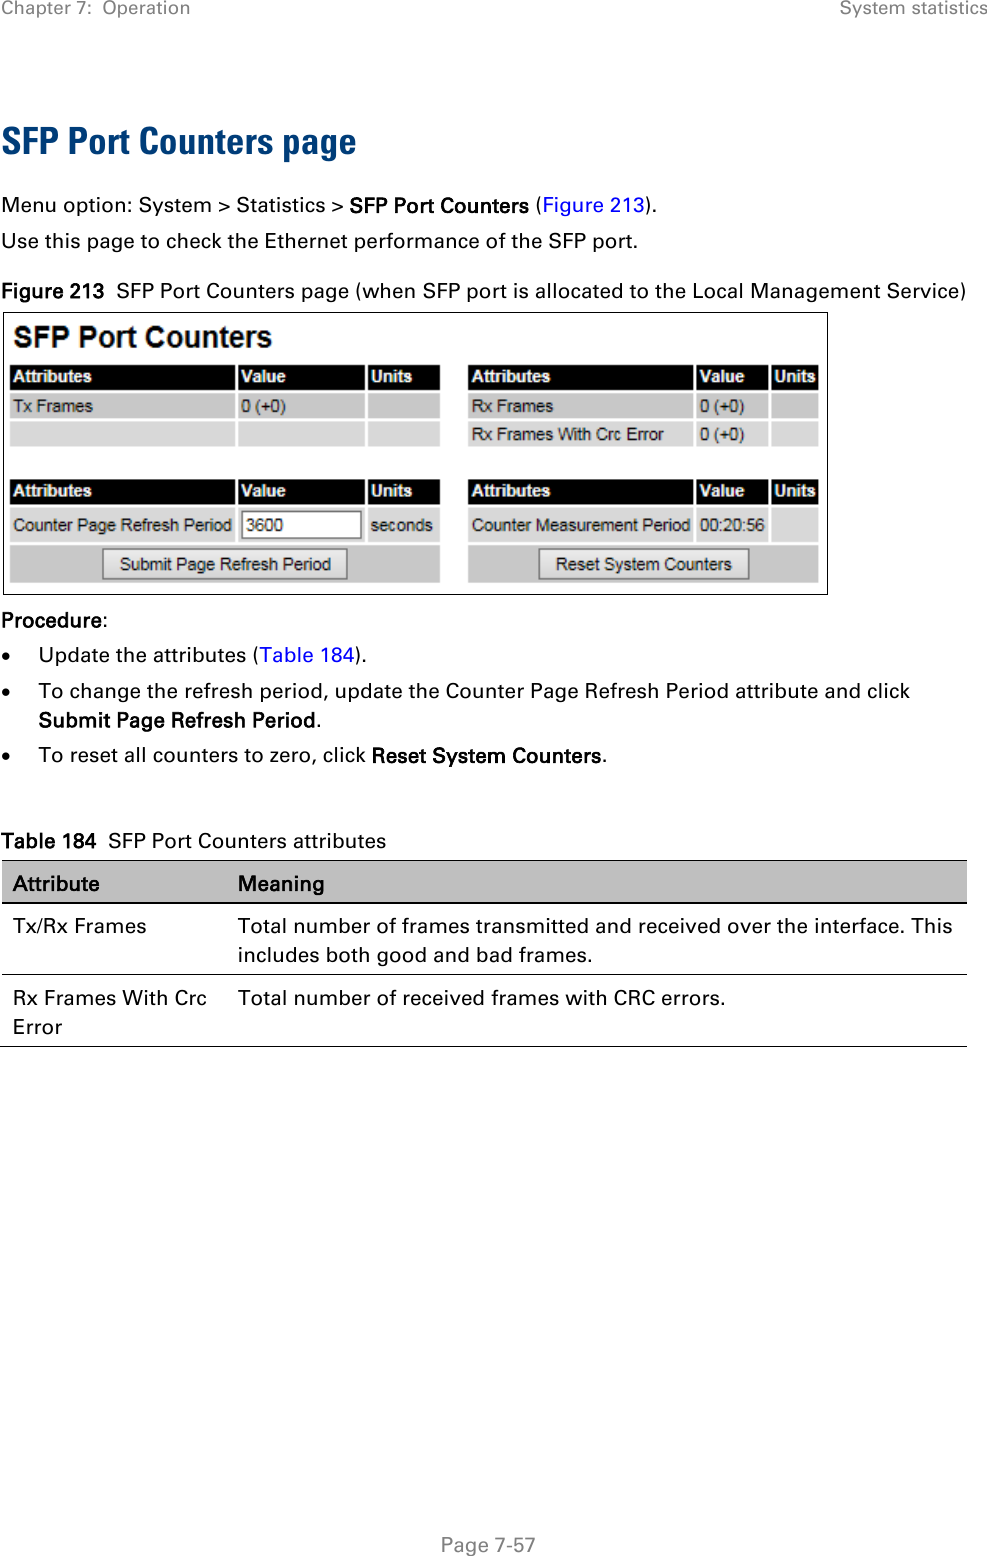 Chapter 7:  Operation System statistics  SFP Port Counters page Menu option: System &gt; Statistics &gt; SFP Port Counters (Figure 213). Use this page to check the Ethernet performance of the SFP port. Figure 213  SFP Port Counters page (when SFP port is allocated to the Local Management Service)  Procedure: • Update the attributes (Table 184). • To change the refresh period, update the Counter Page Refresh Period attribute and click Submit Page Refresh Period. • To reset all counters to zero, click Reset System Counters.  Table 184  SFP Port Counters attributes Attribute Meaning Tx/Rx Frames  Total number of frames transmitted and received over the interface. This includes both good and bad frames. Rx Frames With Crc Error Total number of received frames with CRC errors.      Page 7-57 